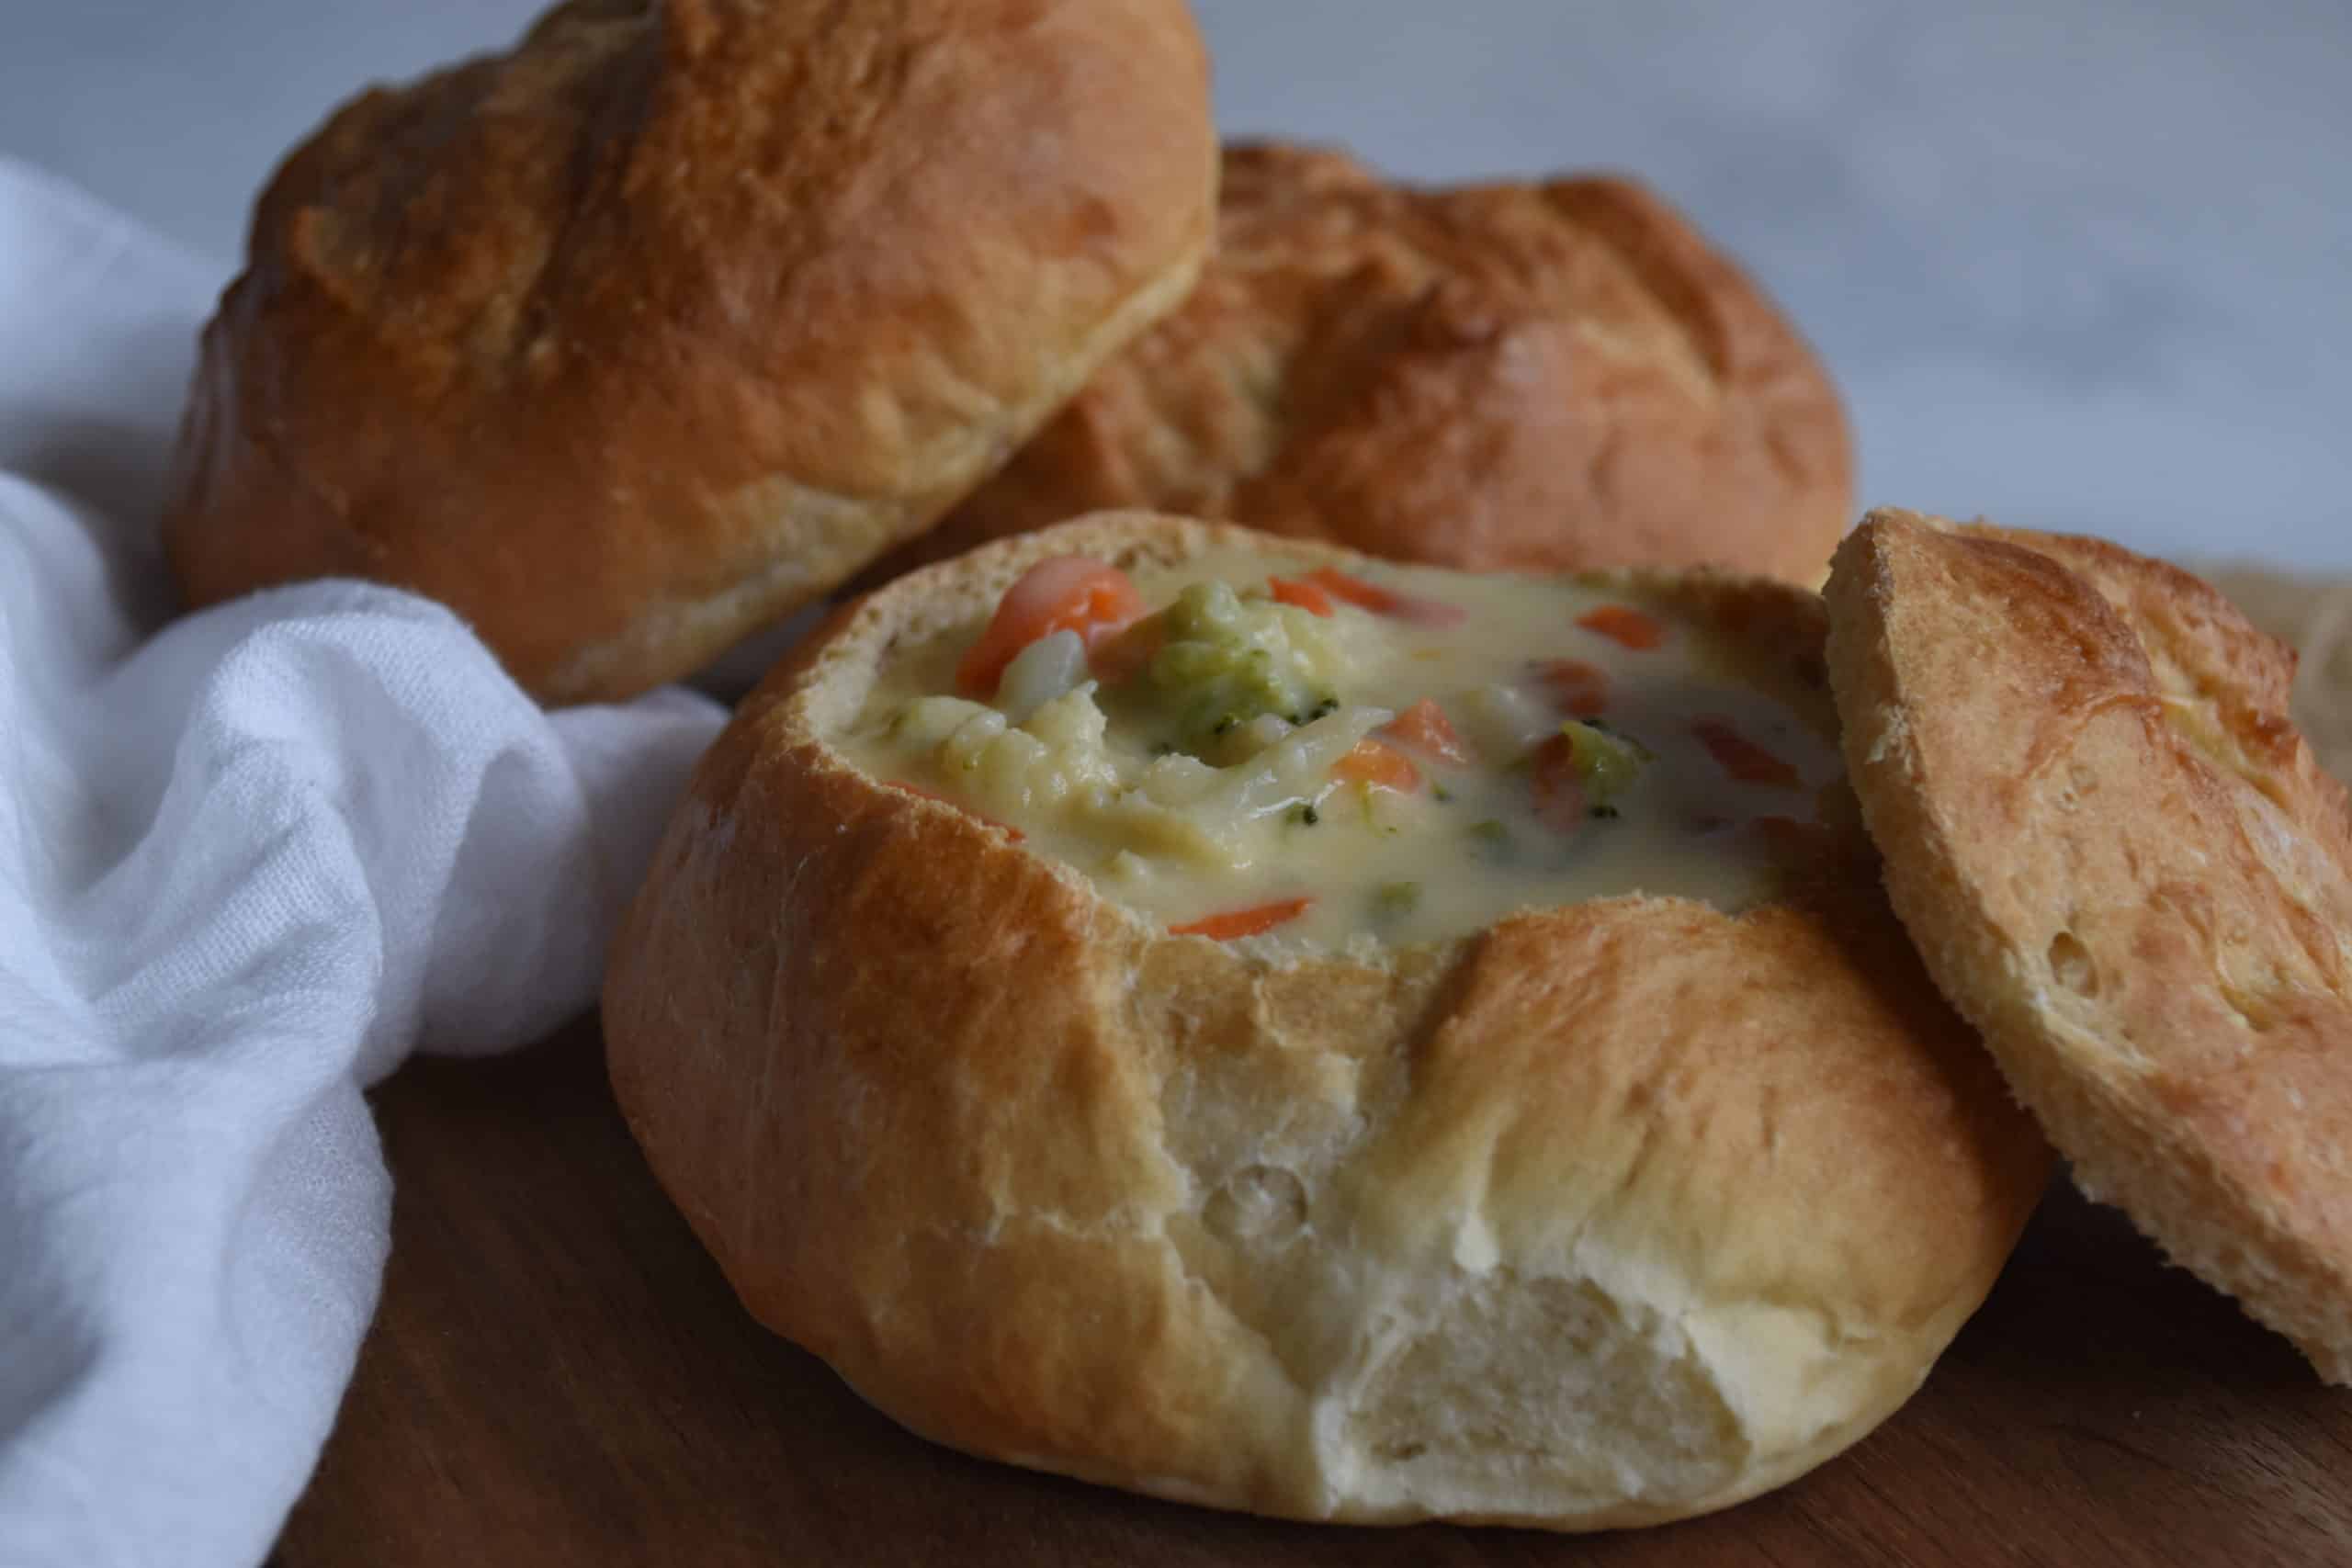 Homemade Bread Bowl filled with Cheesy Broccoli Cauliflower Carrot Soup with 2 extra bowls.